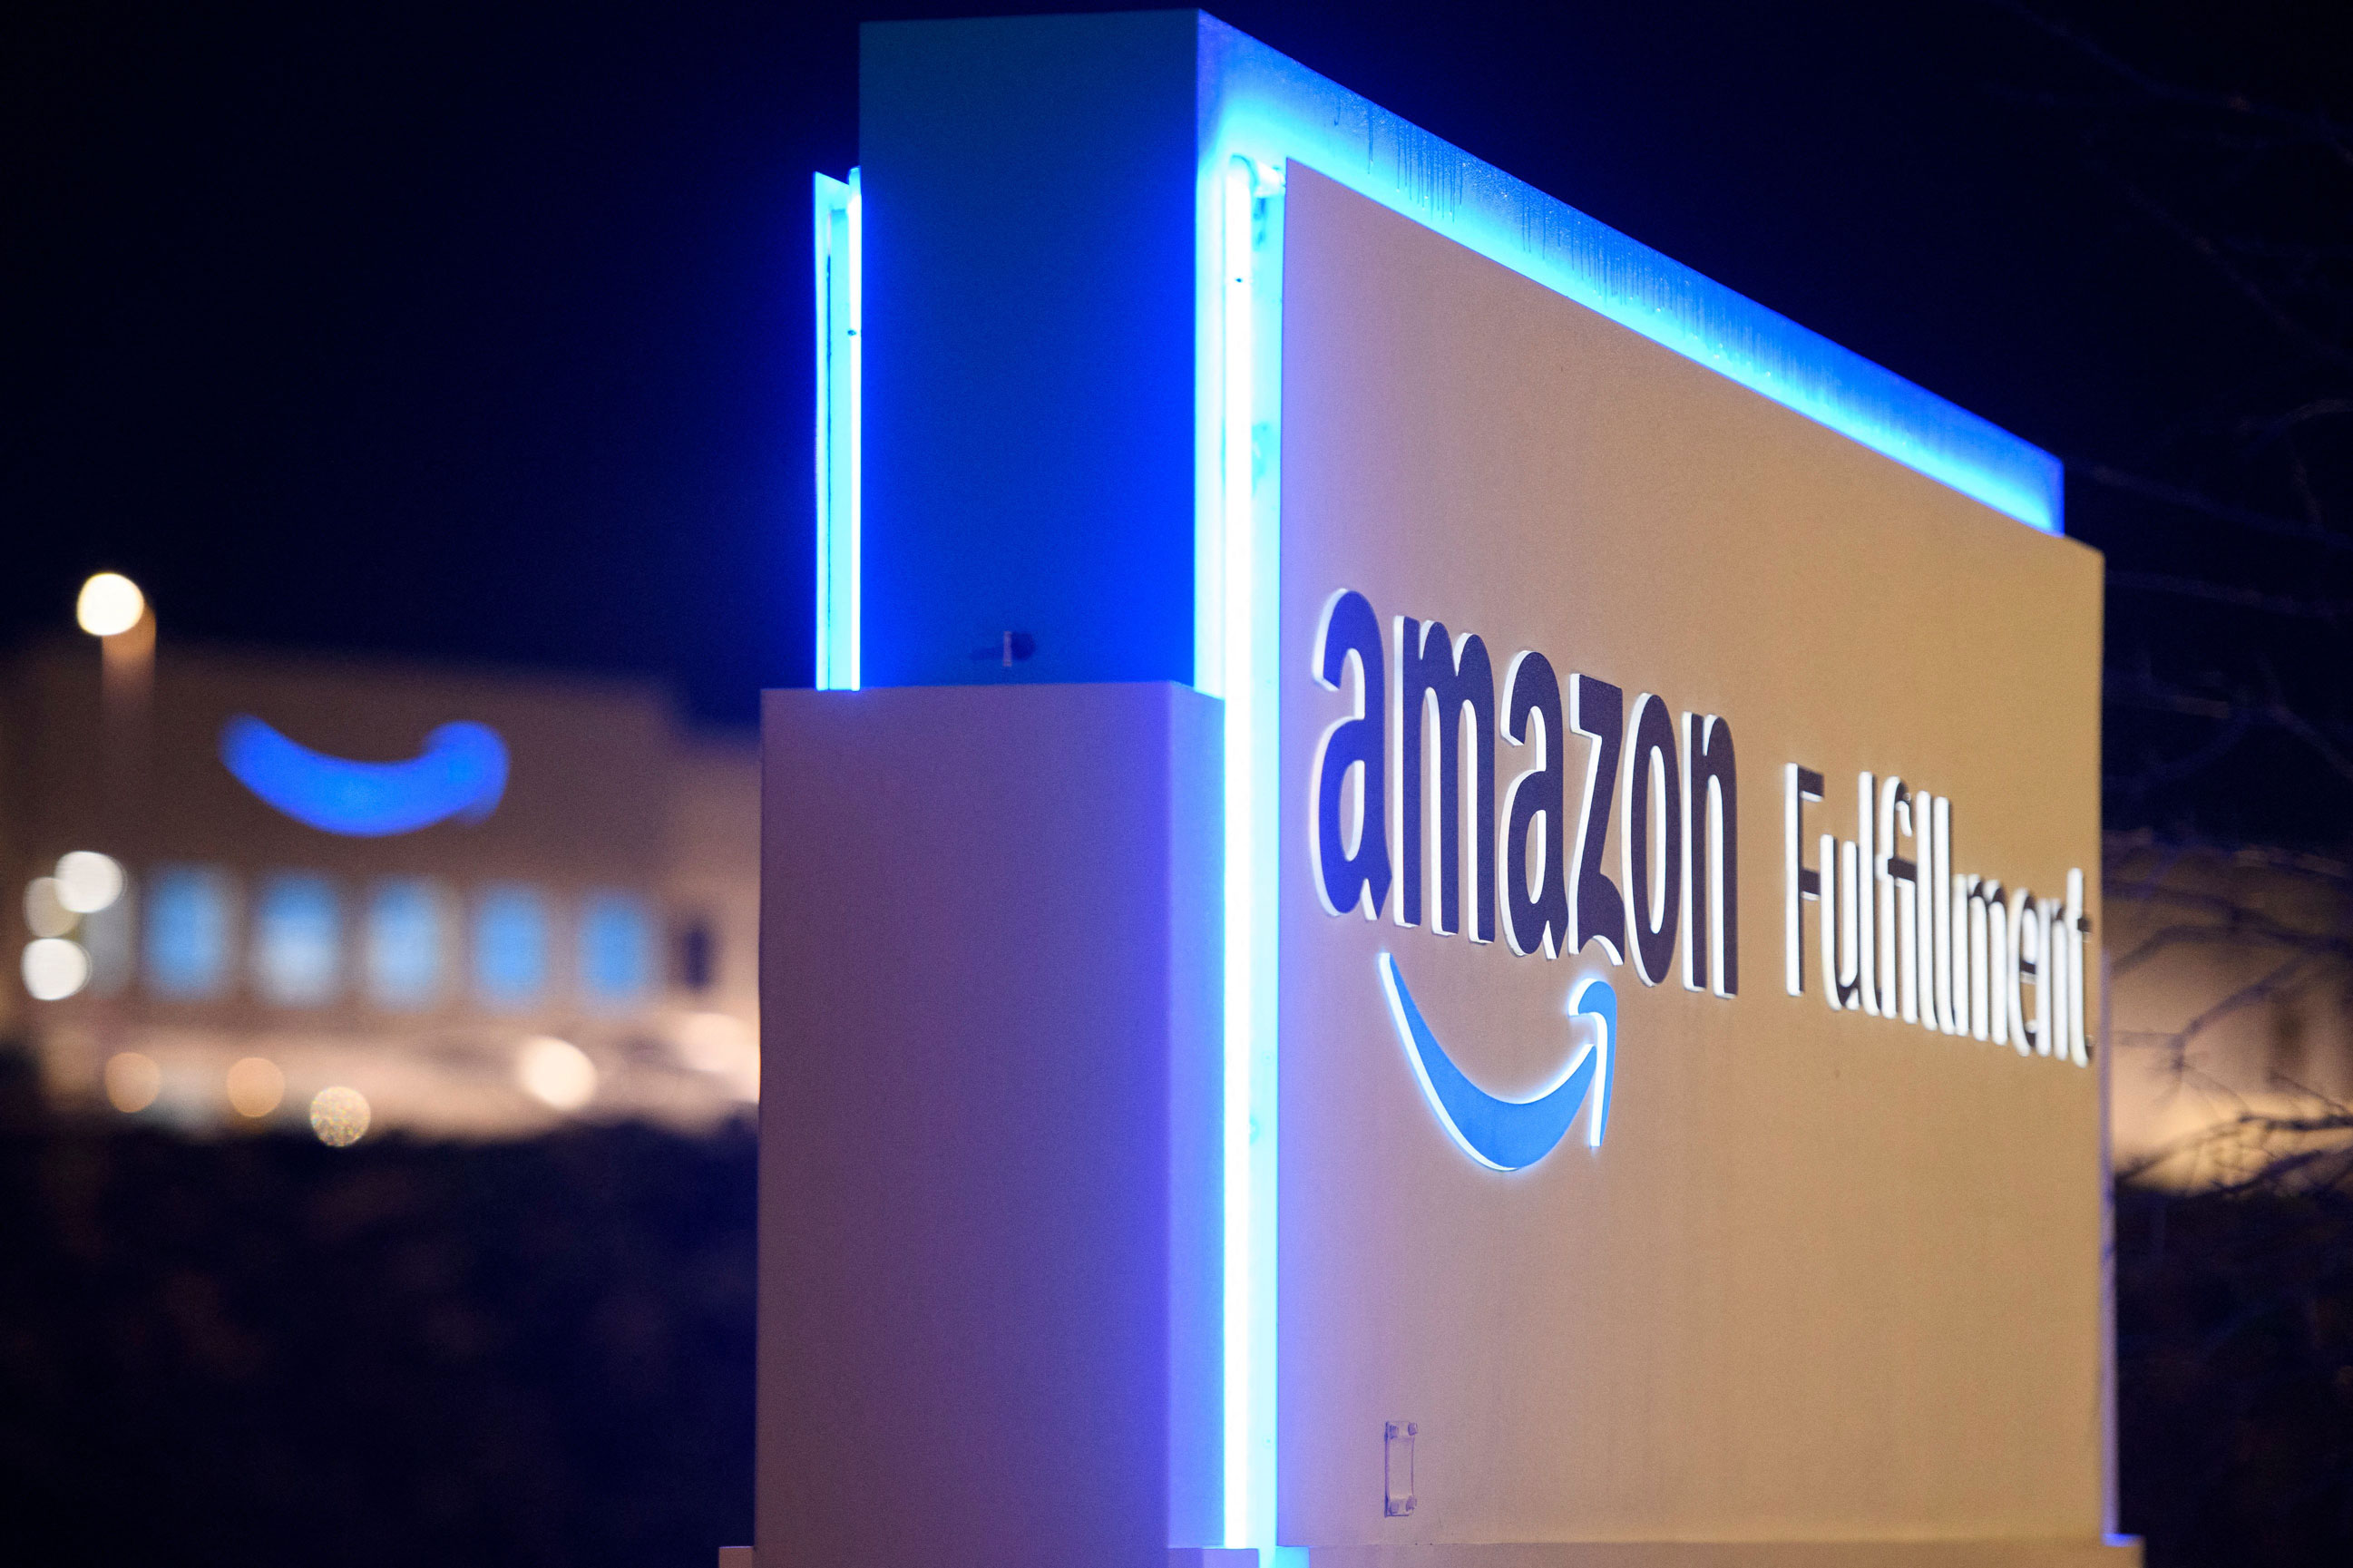 Amazon climate change fund invests in ev charging, renewable fuels